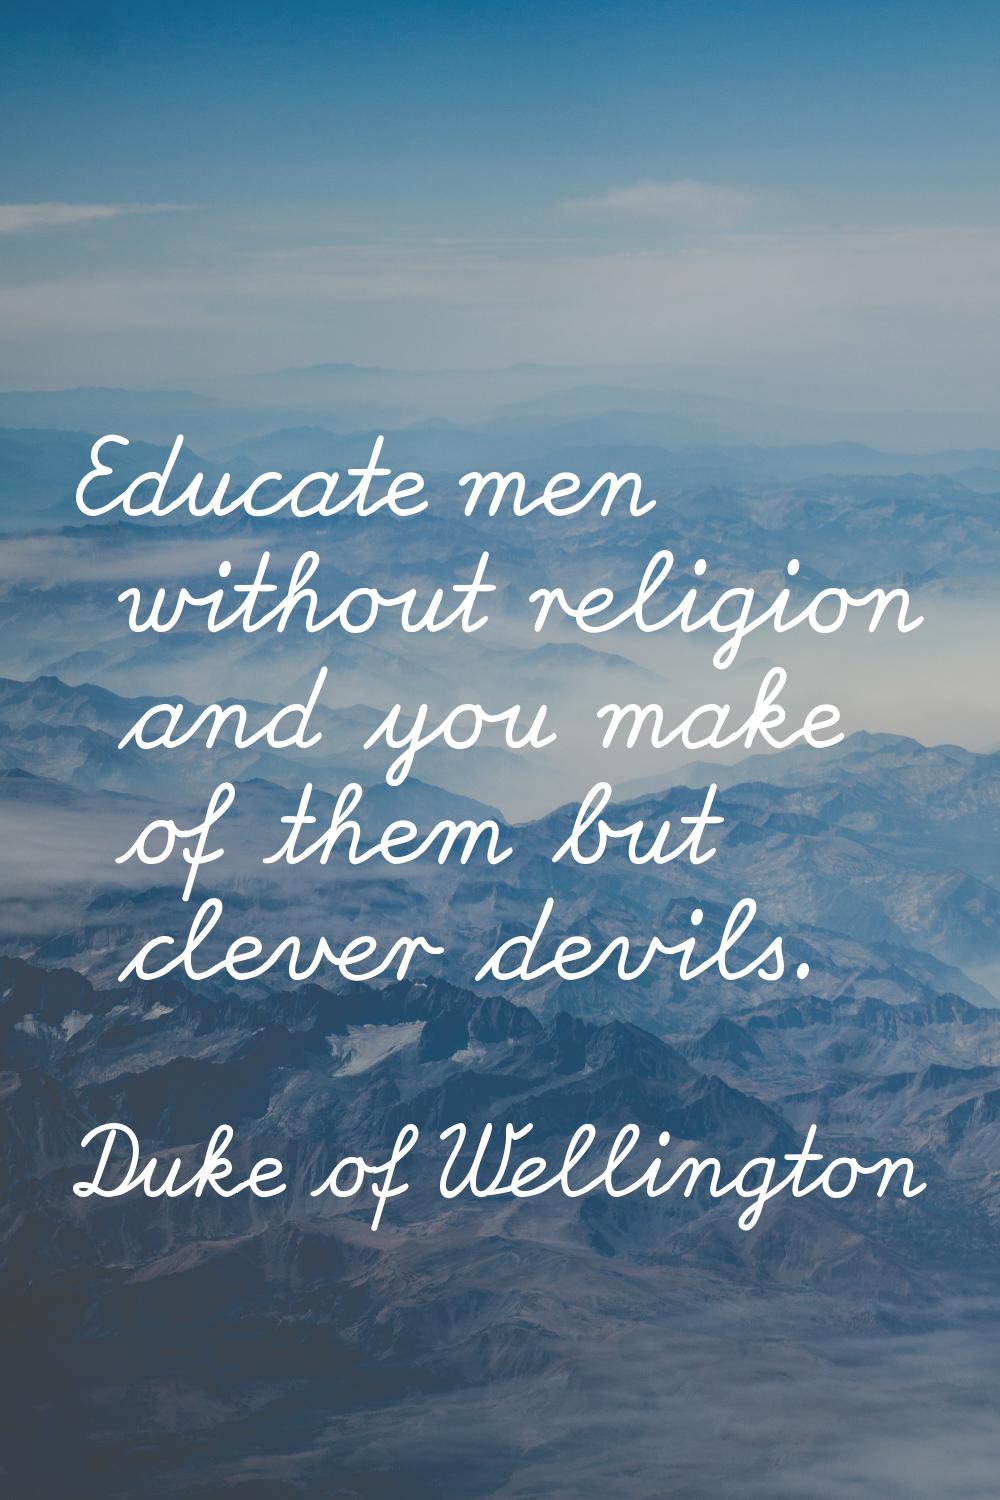 Educate men without religion and you make of them but clever devils.